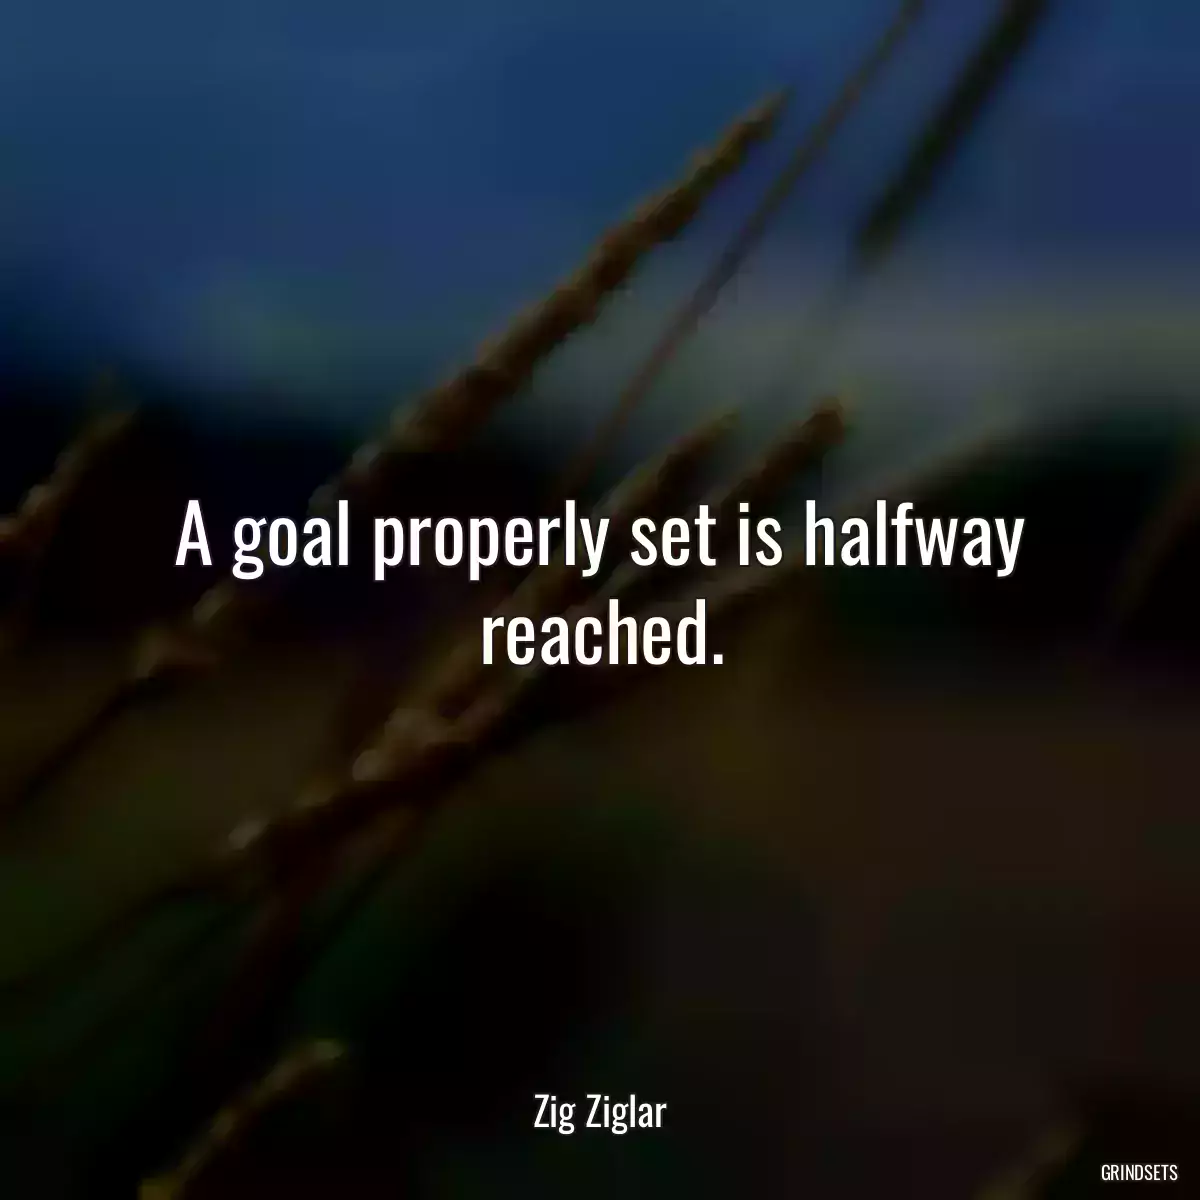 A goal properly set is halfway reached.